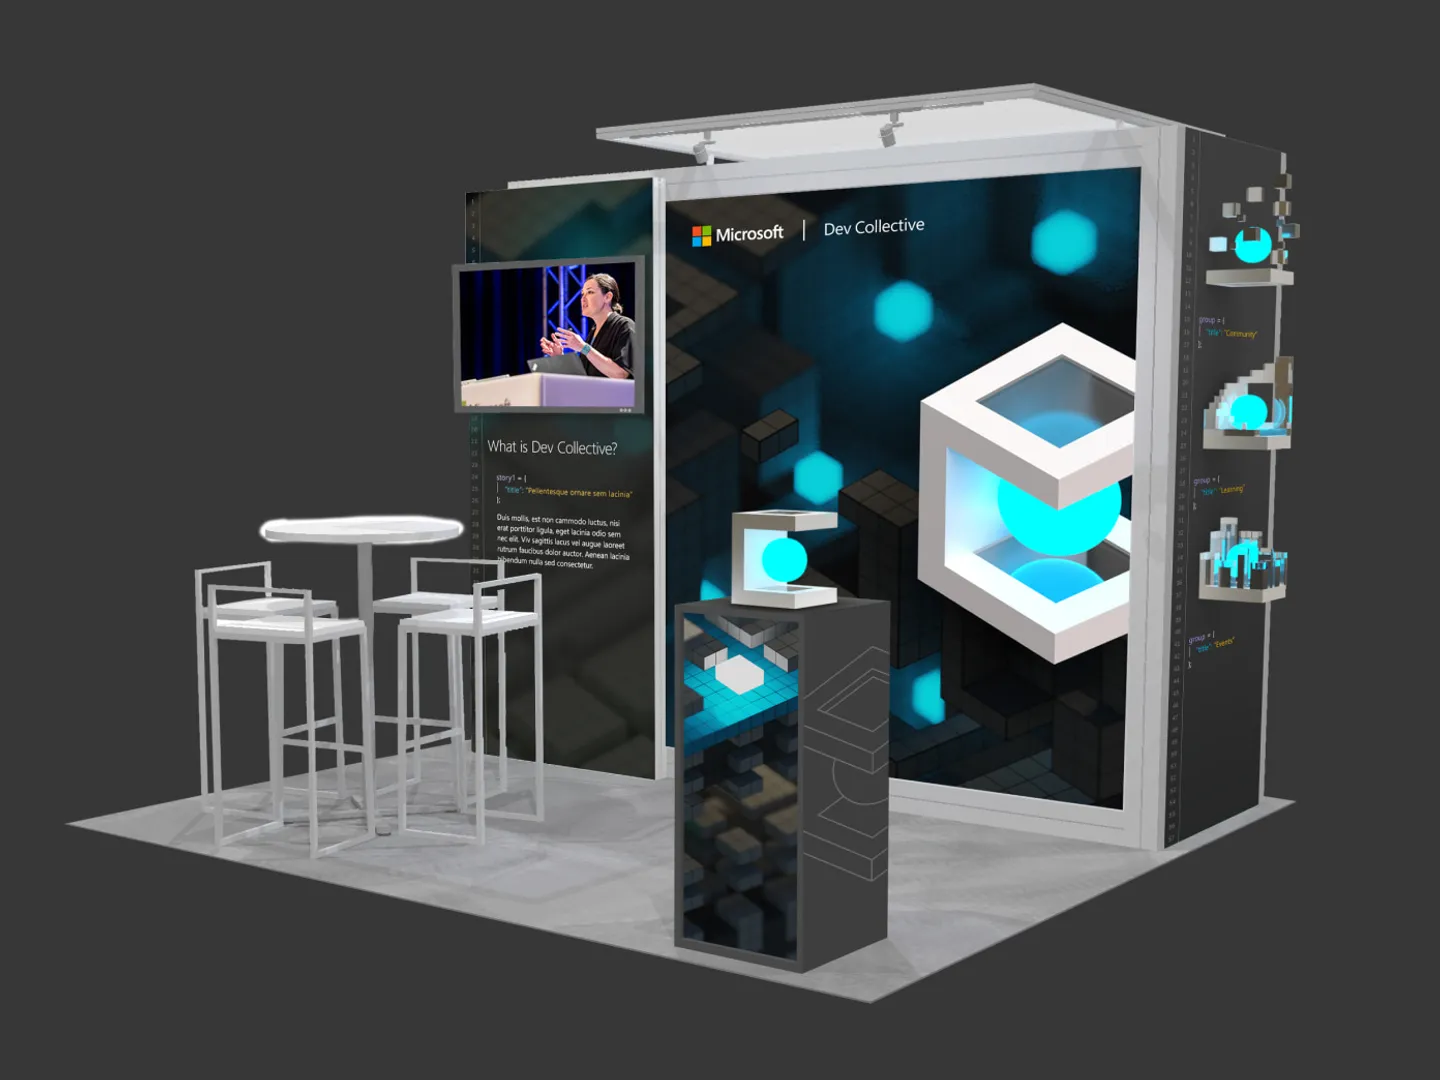 Image of a booth design with Dev Collective branding